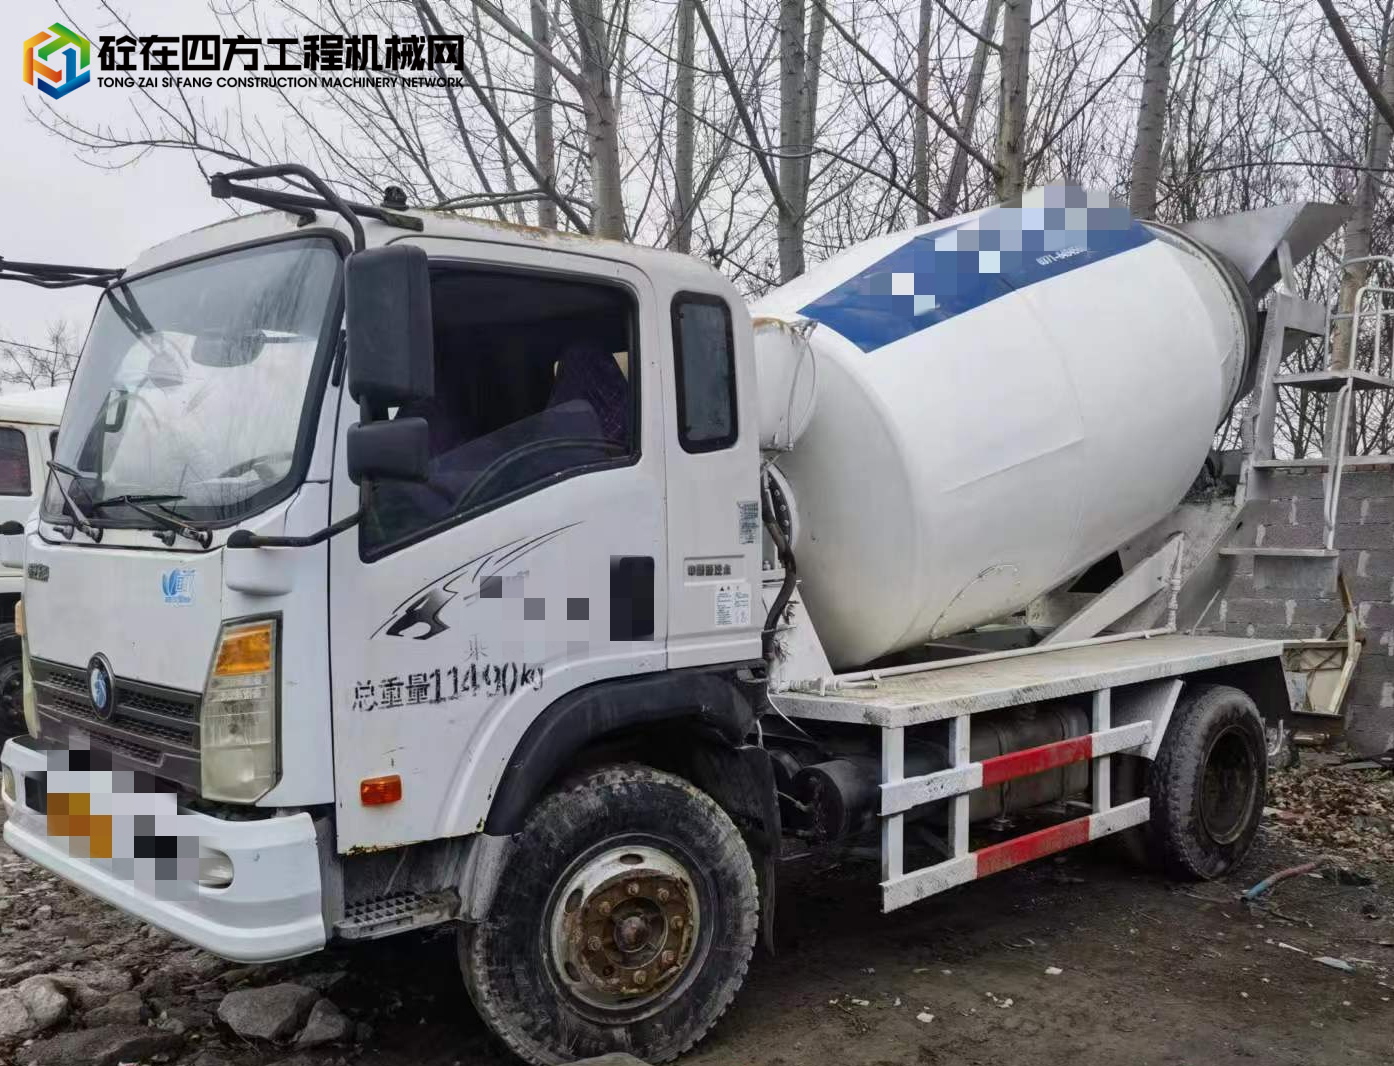 https://images.tongzsf.com/tong/truck_machine/20240123/165af1241587db.jpg